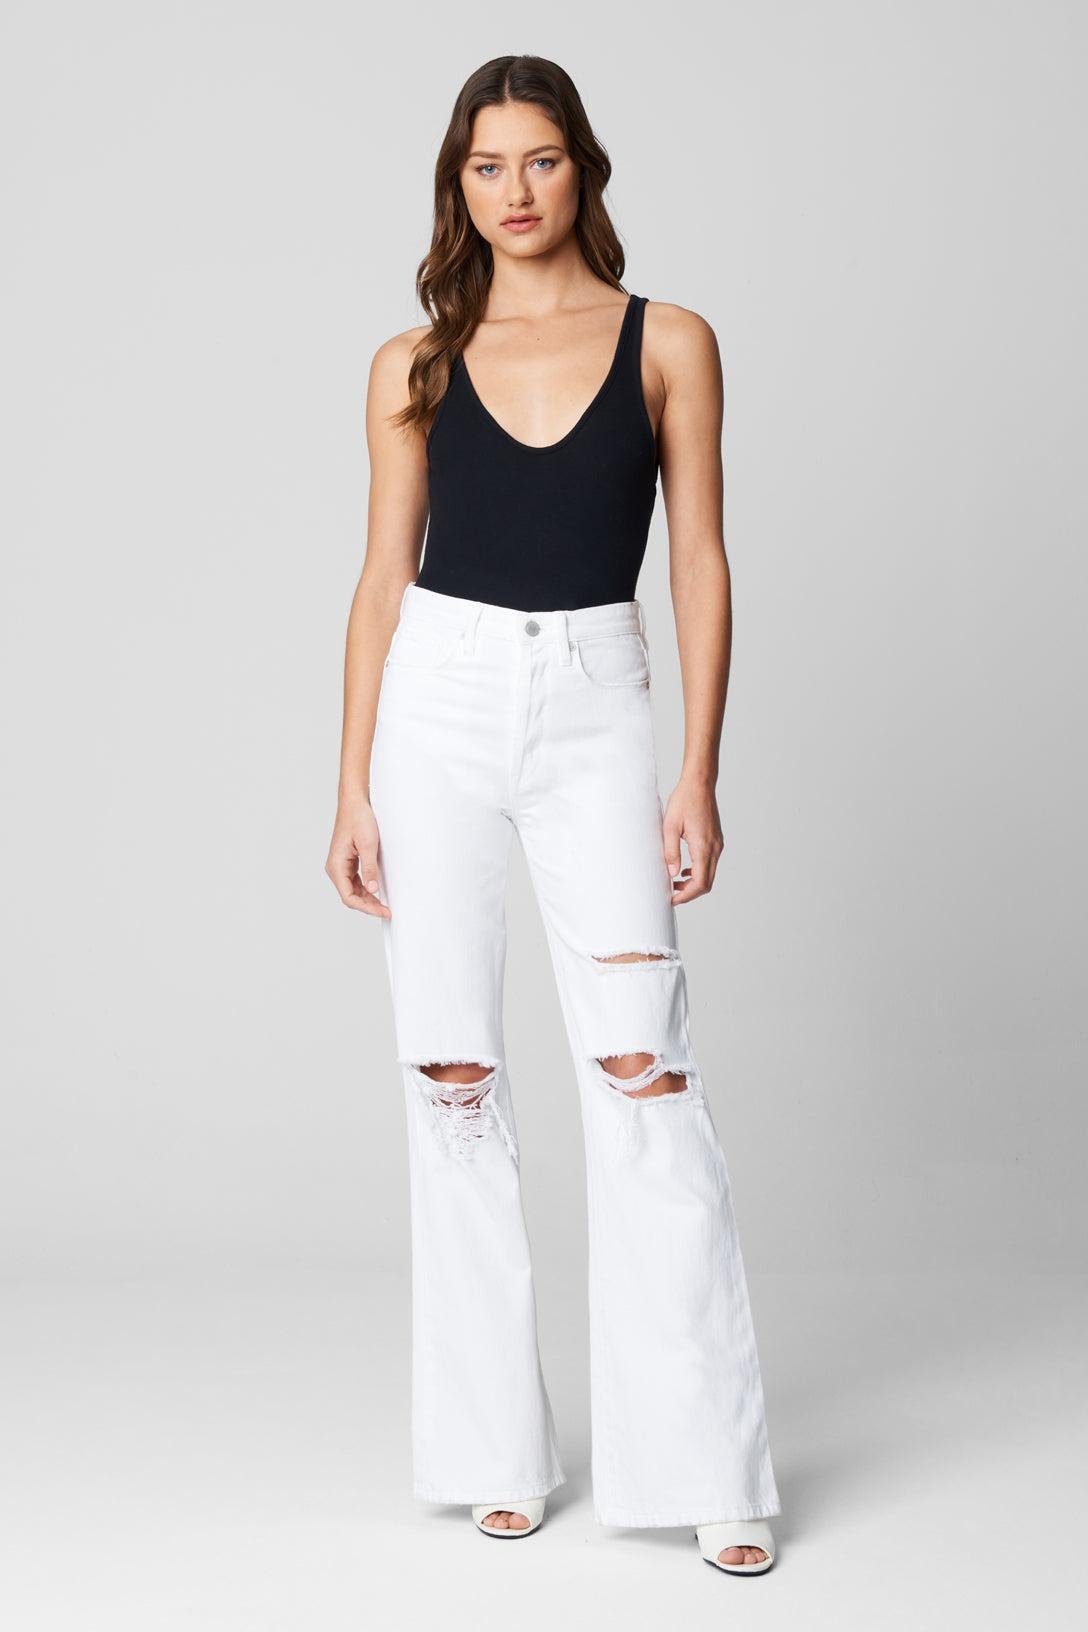 Blank NYC The Franklin Jeans by BLANK NYC